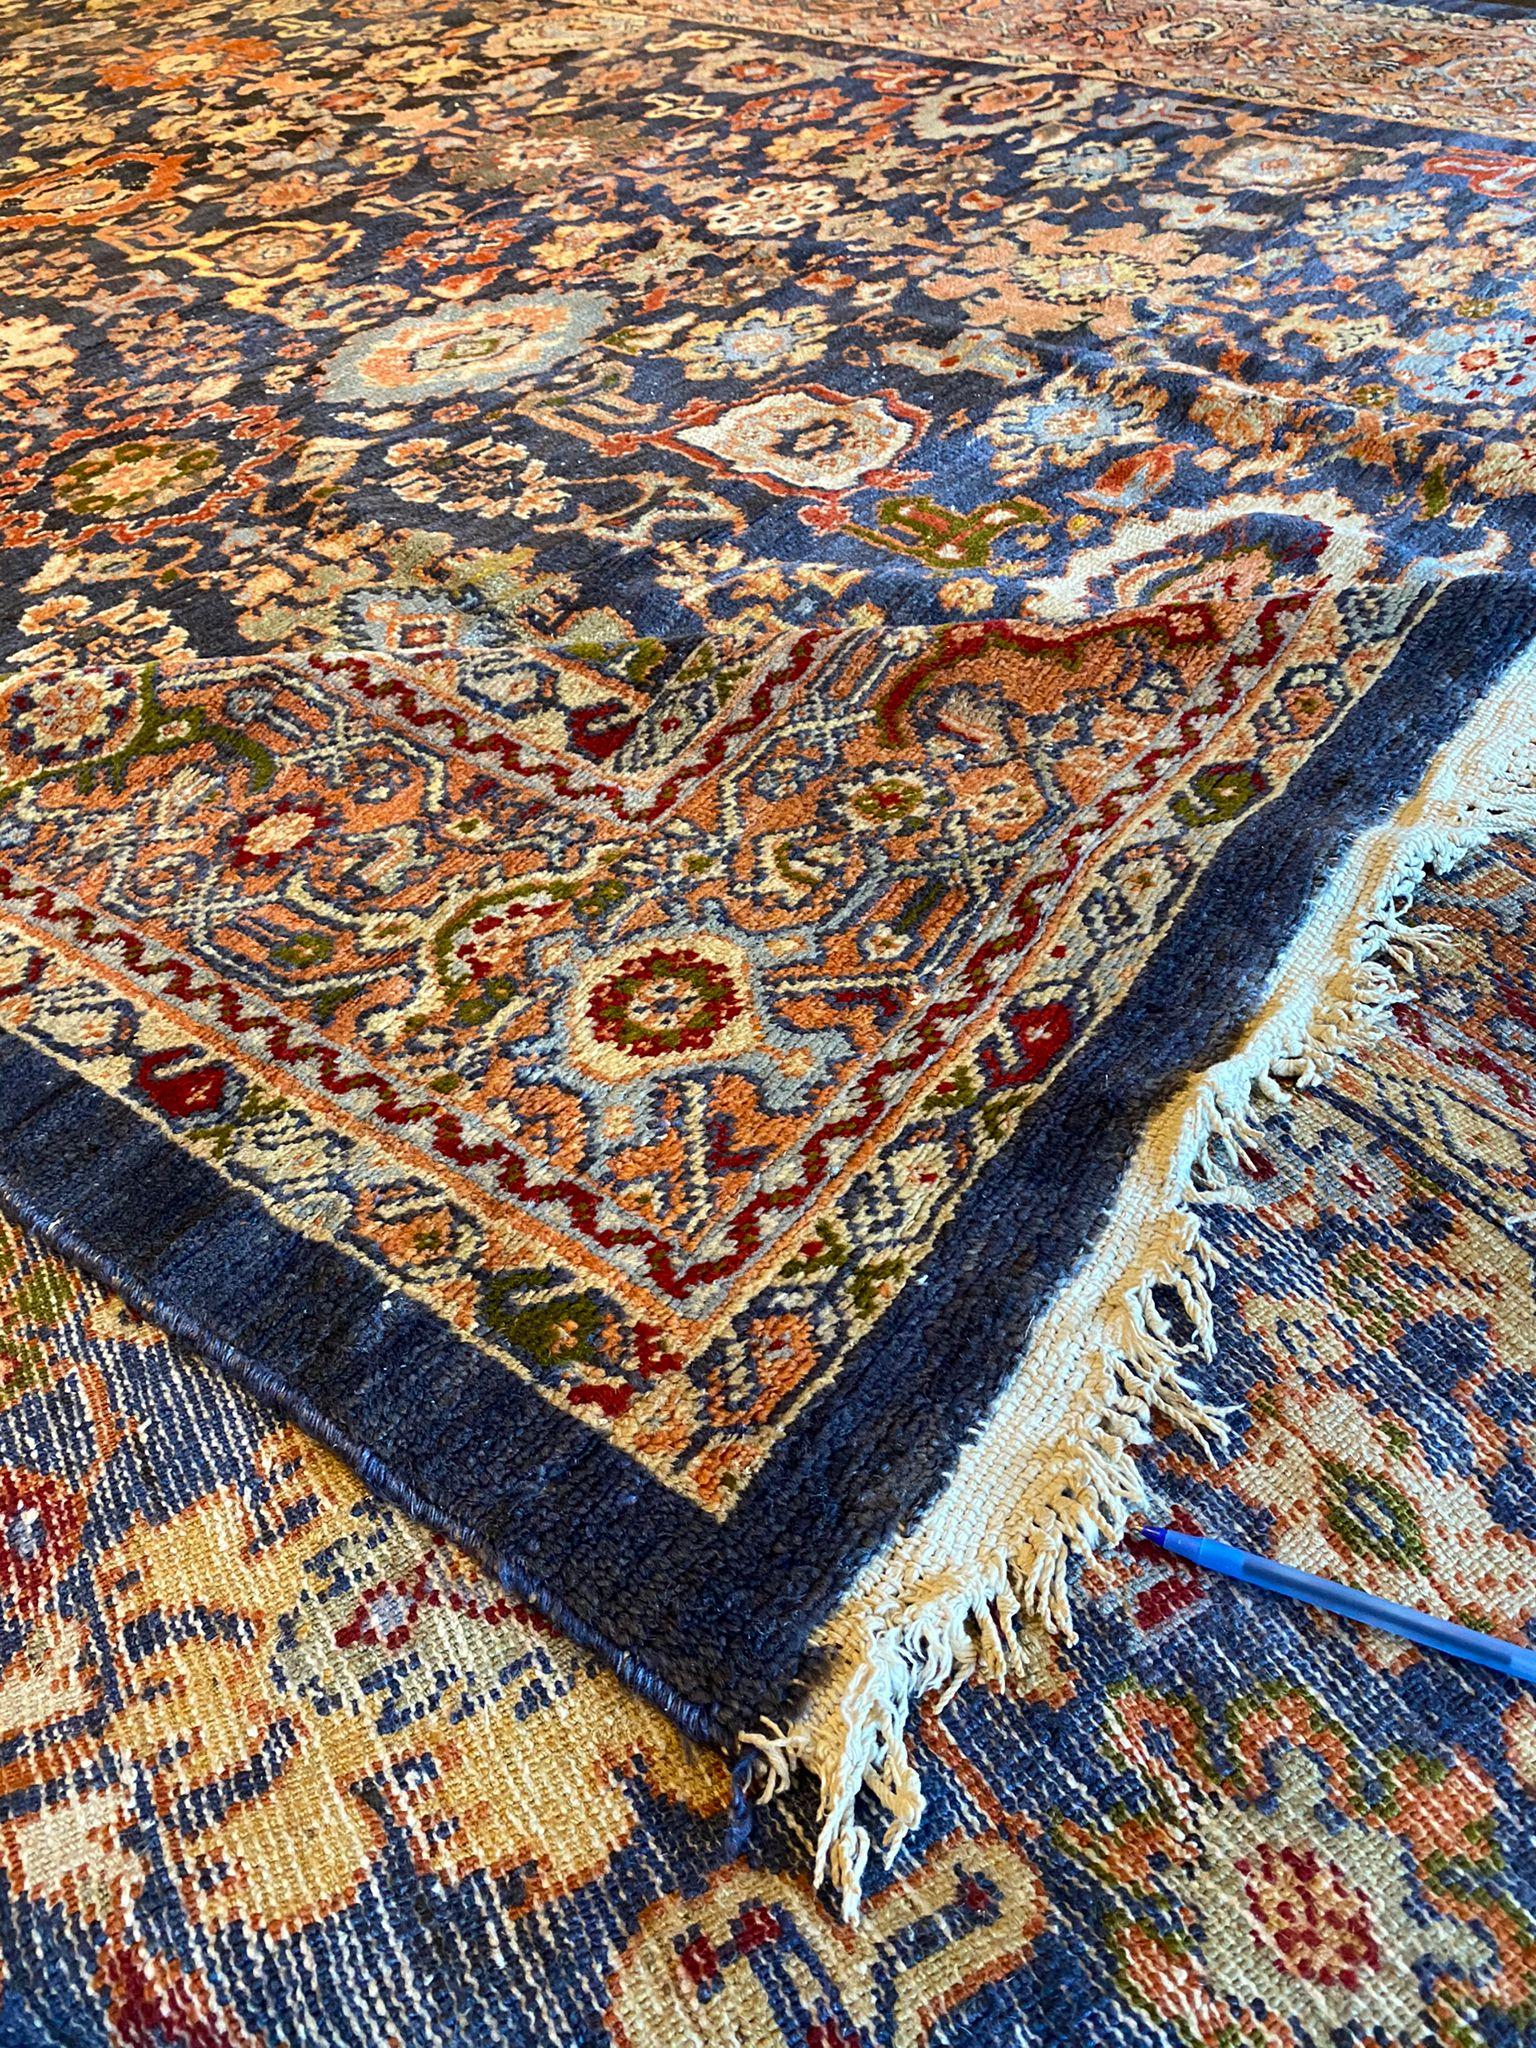 A Vintage Sultanabad Rug of this size and quality is not only a floor covering but a work of art that can define and elevate the aesthetic of an entire room. Its intricate design, vivid colors, and timeless appeal make it a prized possession for